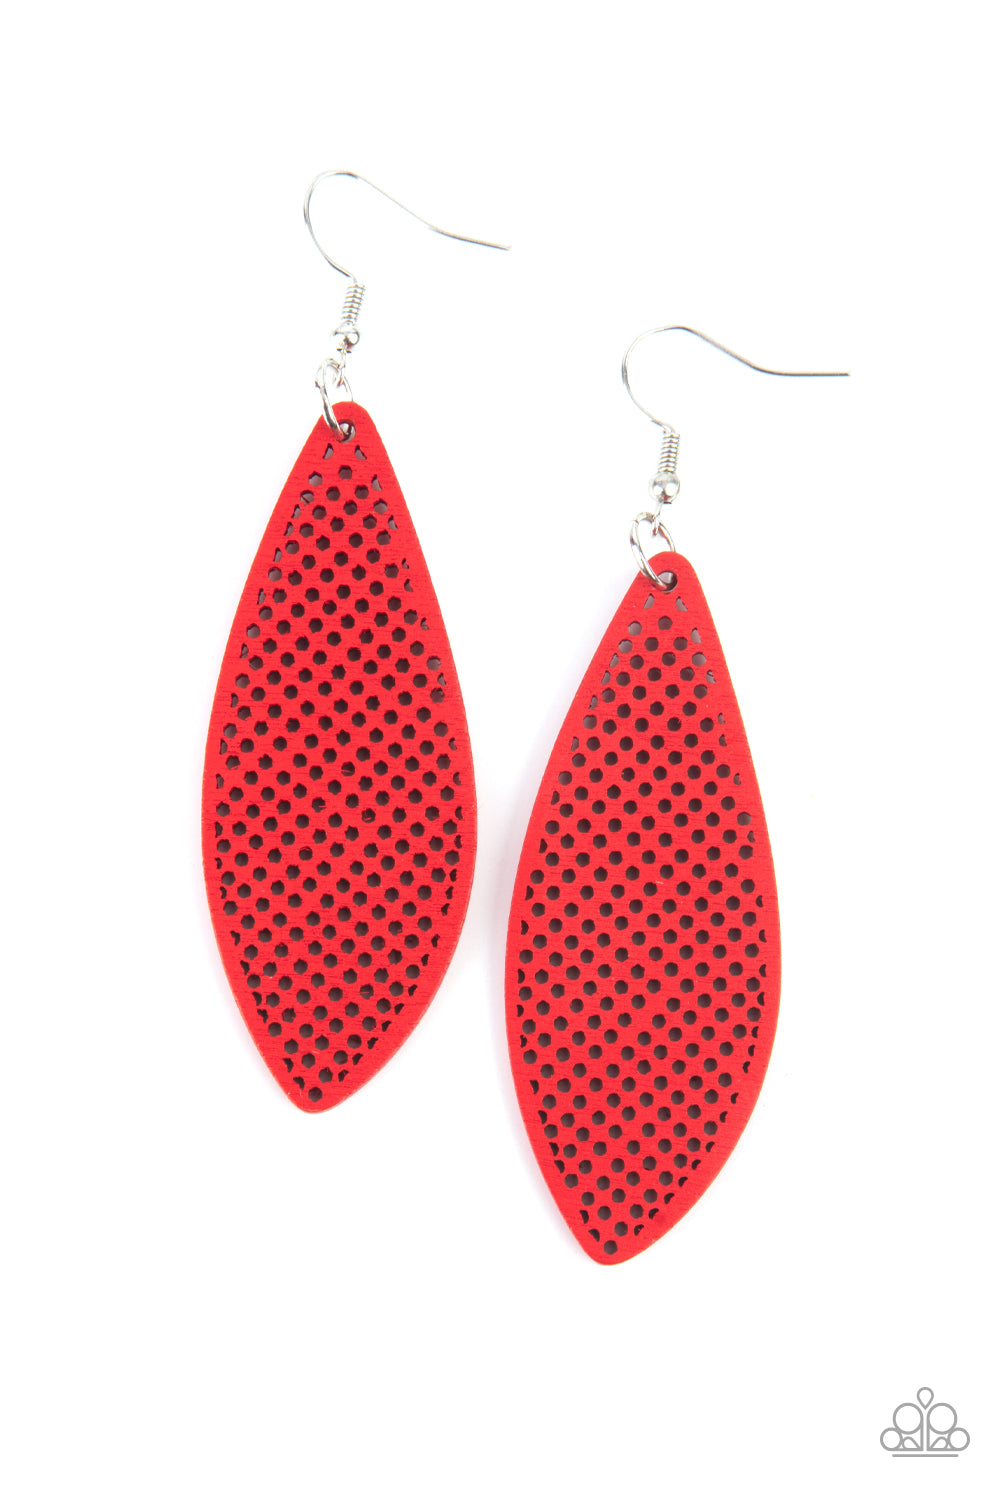 Surf Scene - Red Earrings- Paparazzi Accessories - Paparazzi Accessories 